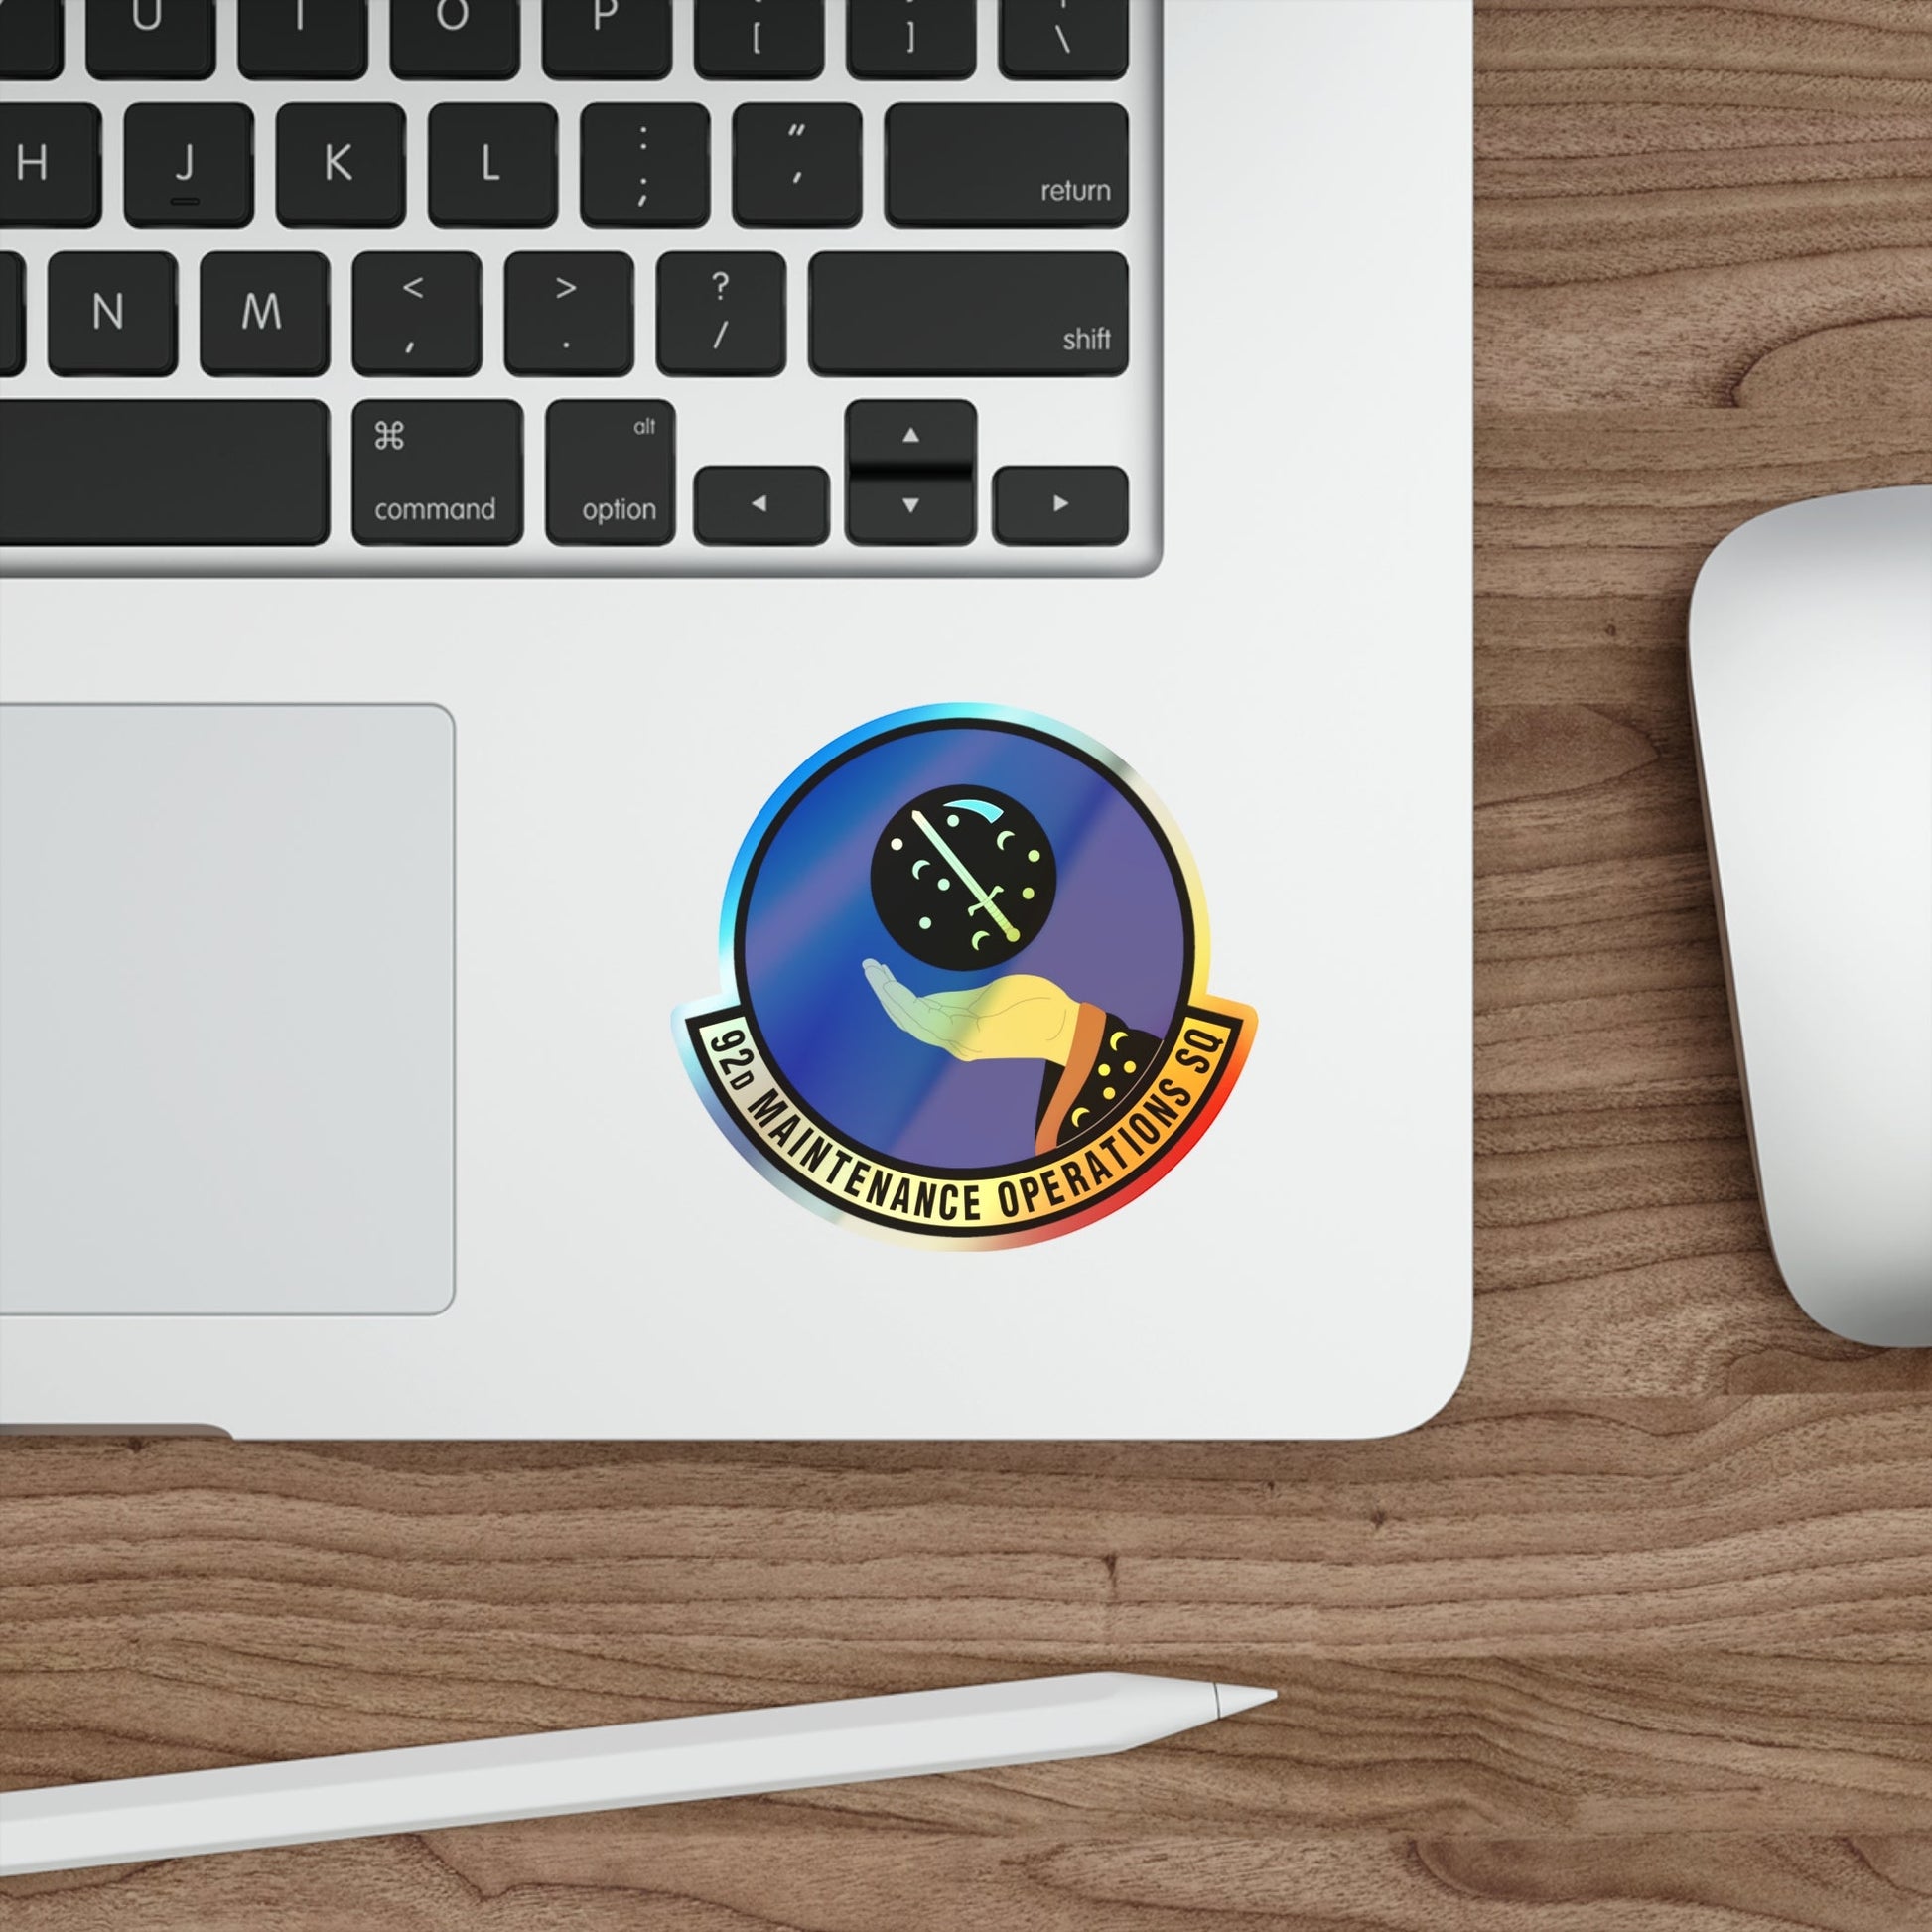 92 Maintenance Operations Squadron AMC (U.S. Air Force) Holographic STICKER Die-Cut Vinyl Decal-The Sticker Space